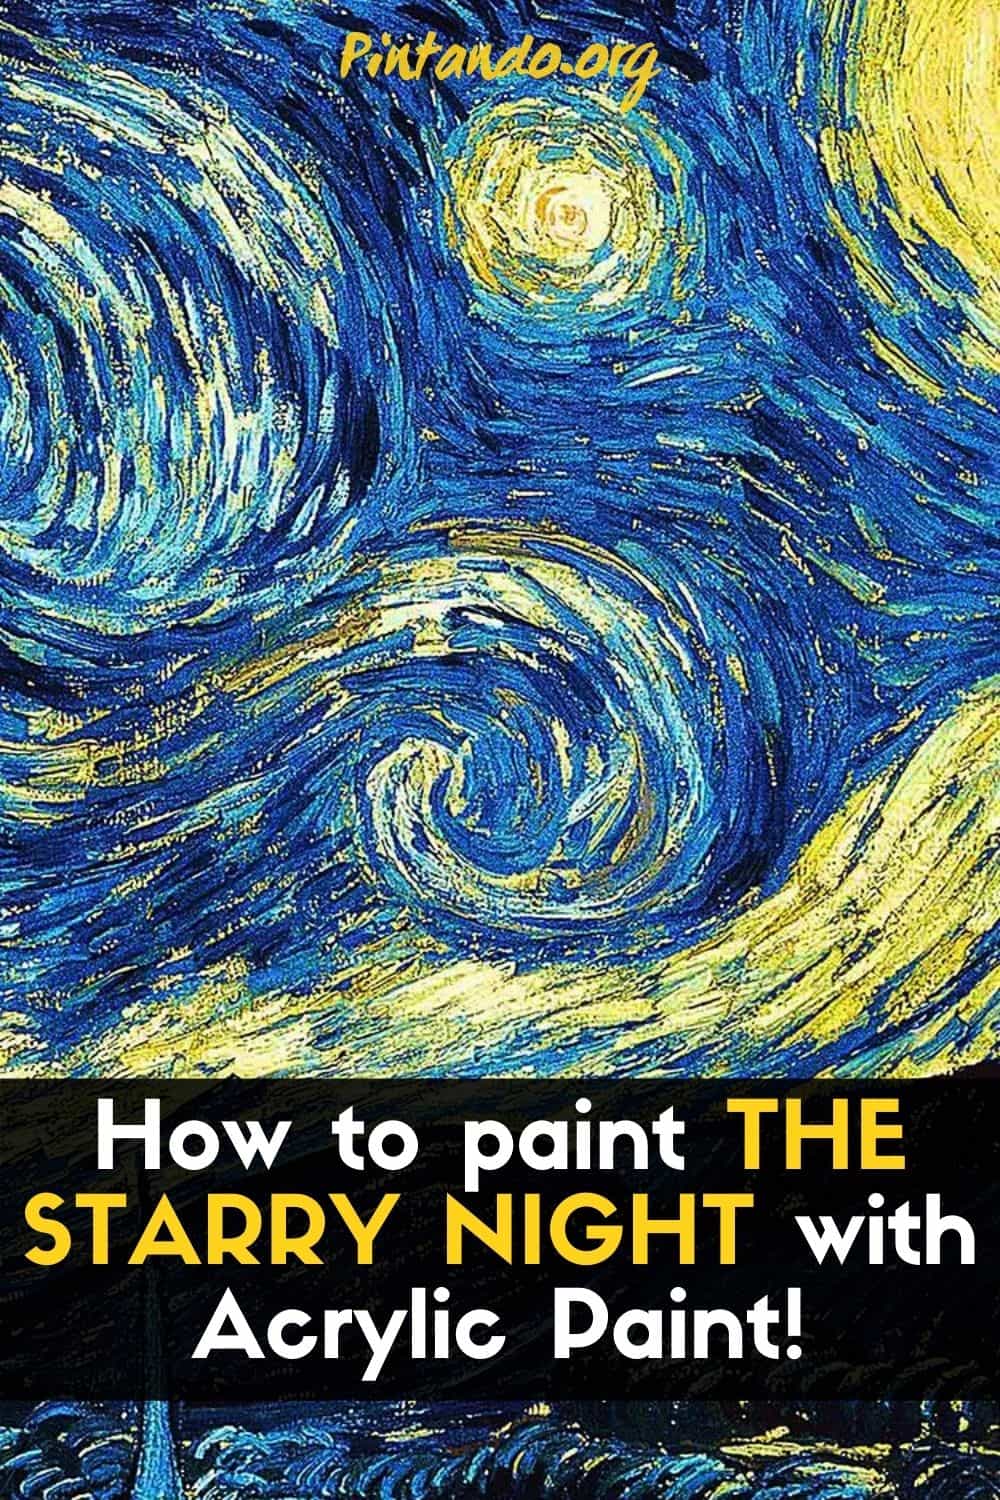 How to paint THE STARRY NIGHT with Acrylic Paint!